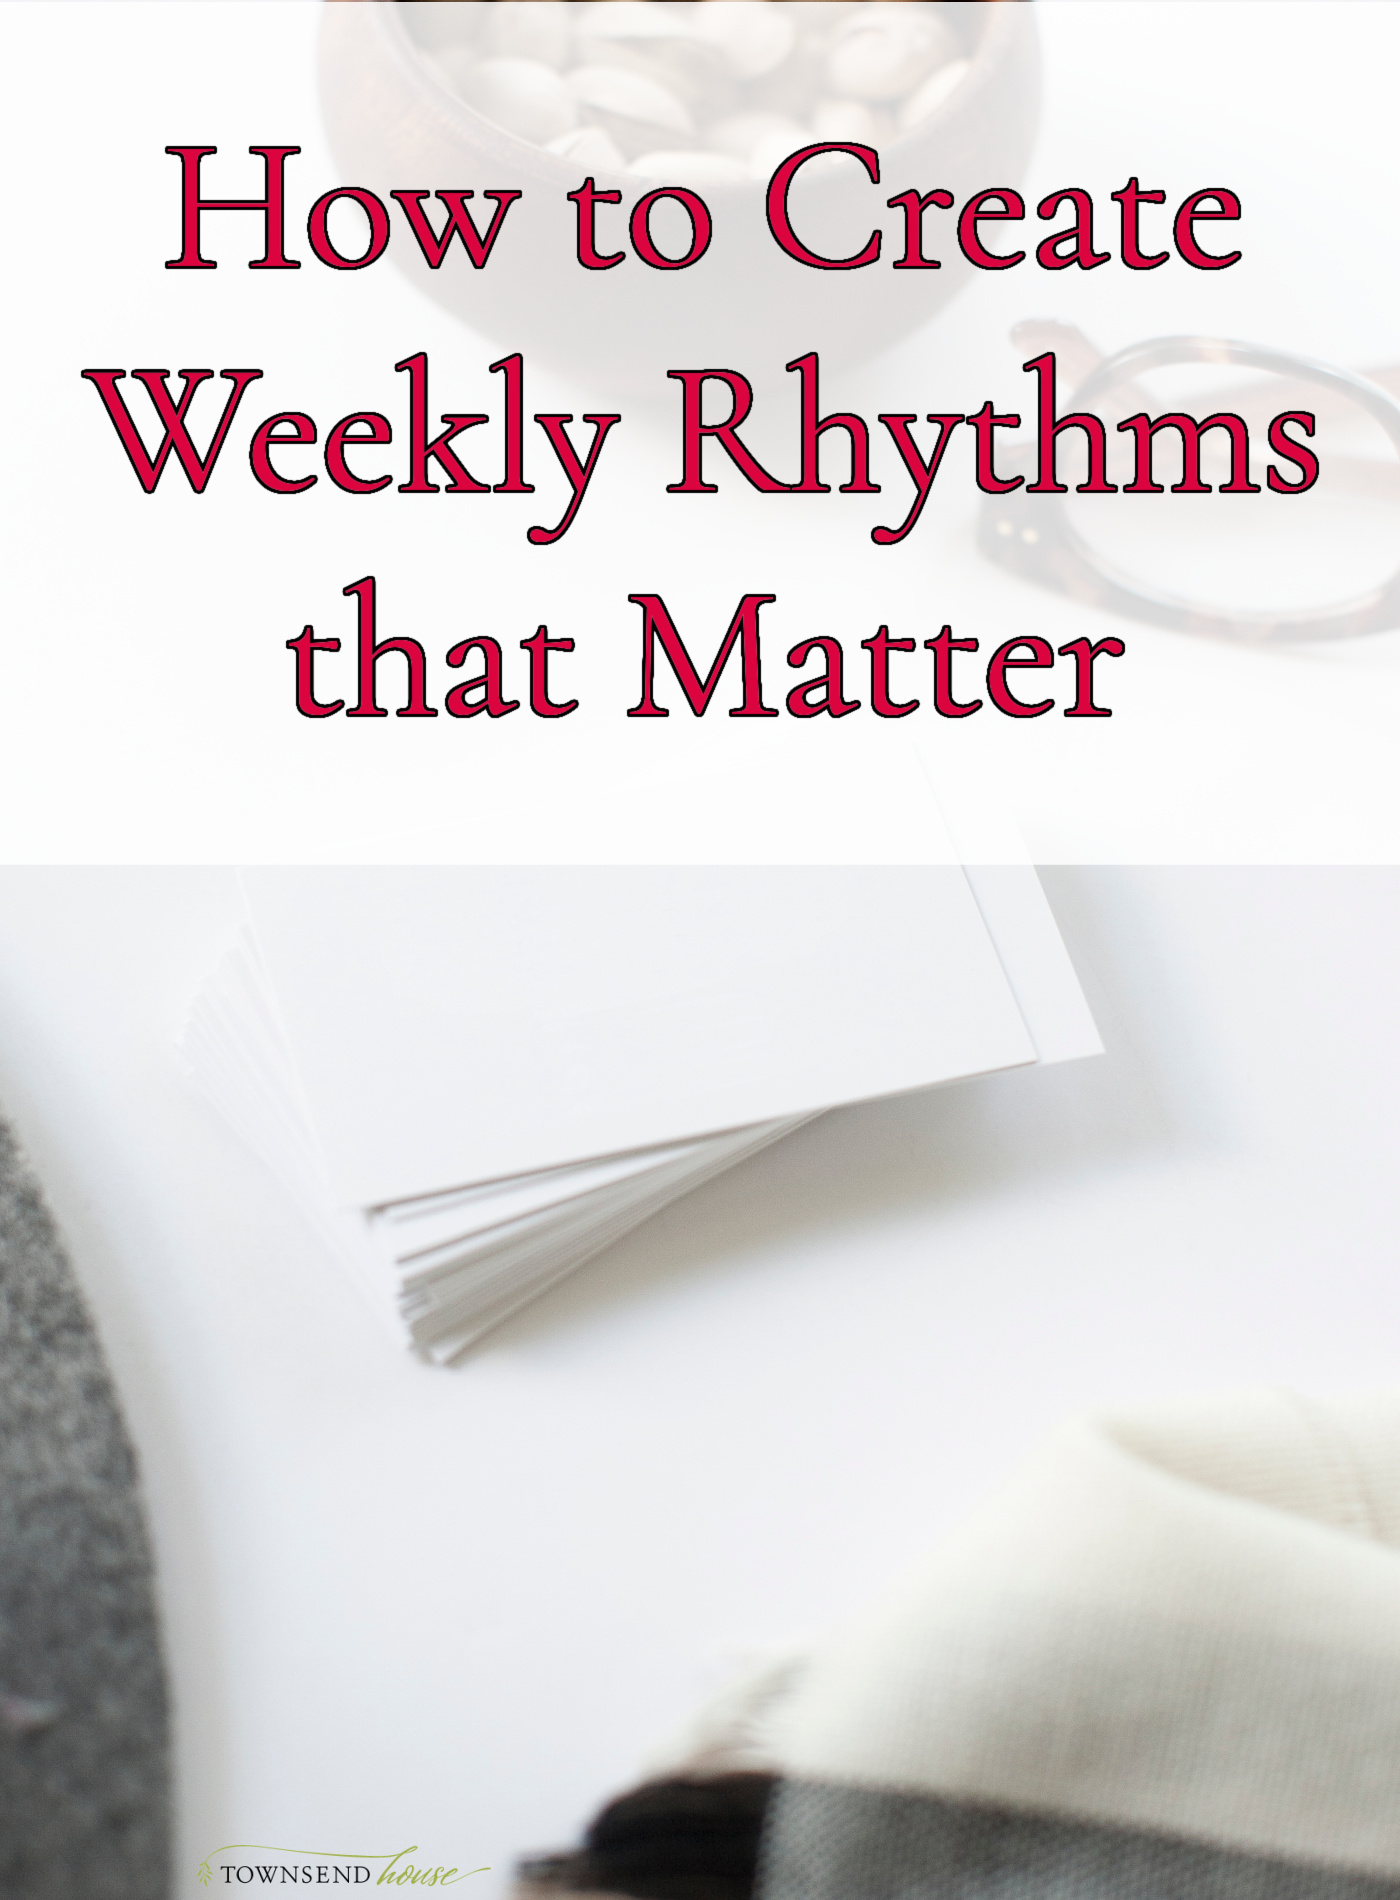 How to Create Weekly Rhythms that Matter